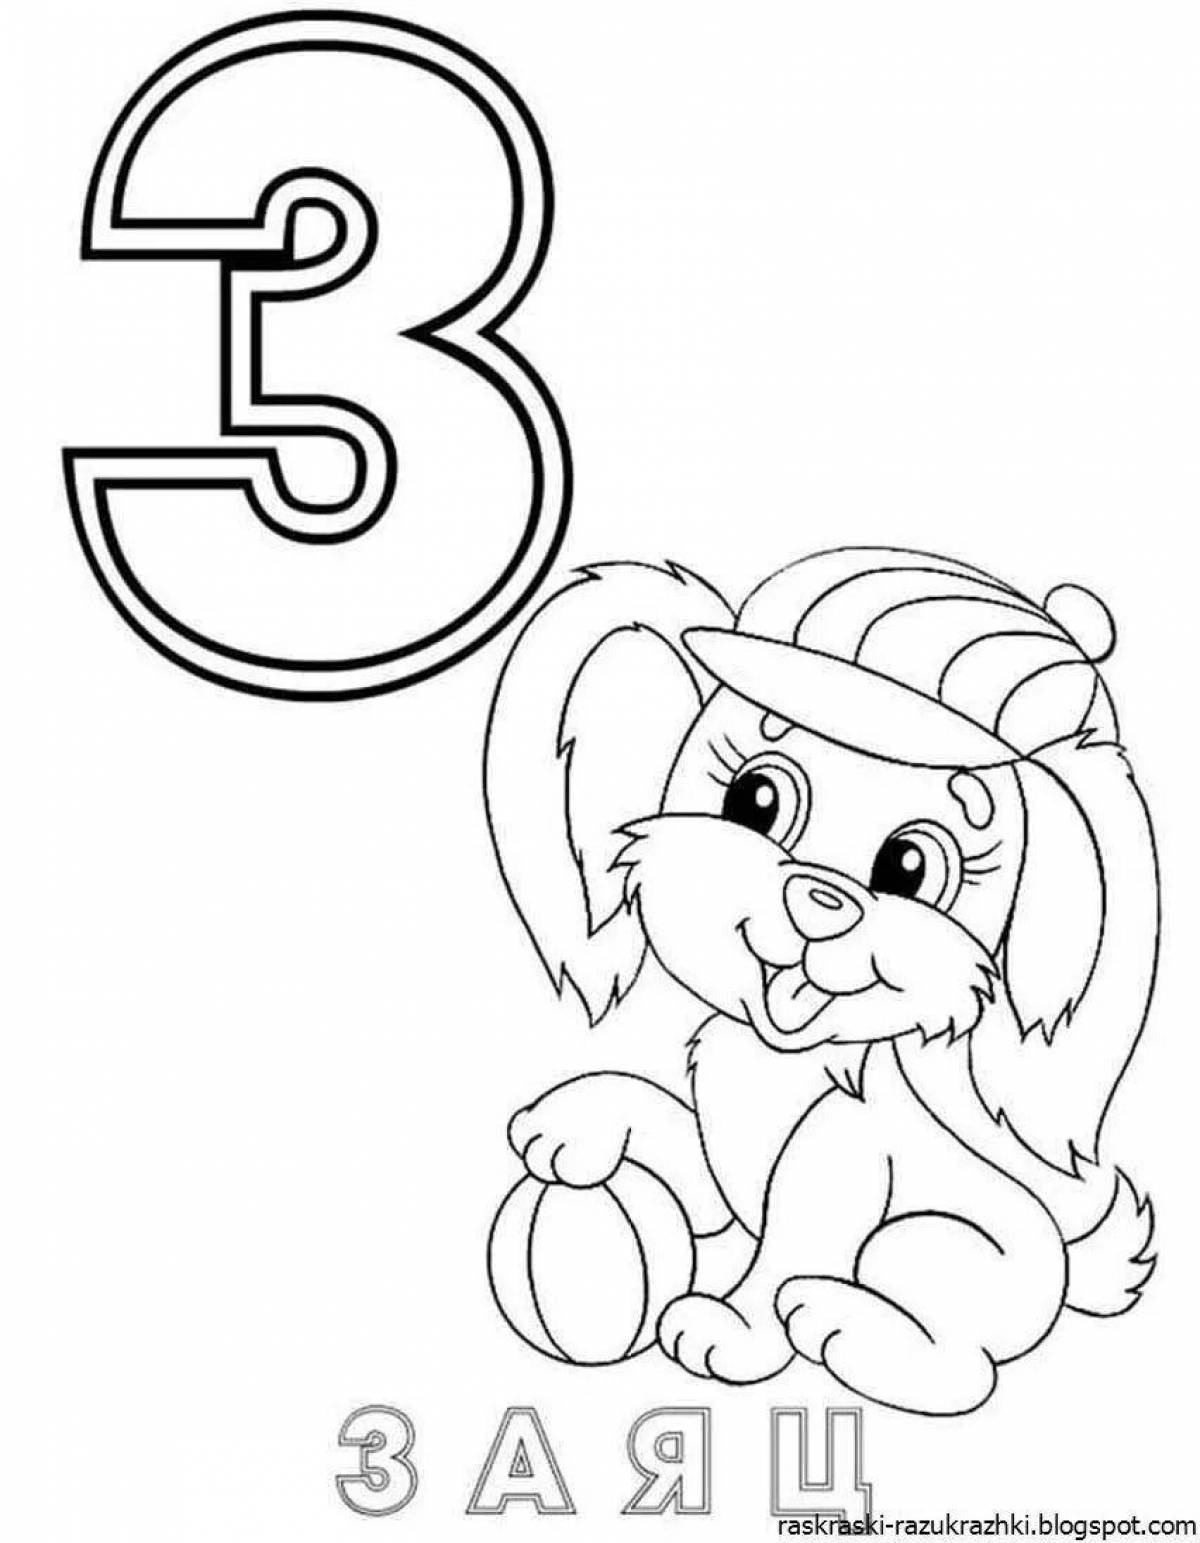 Fun coloring letters for 5 year olds